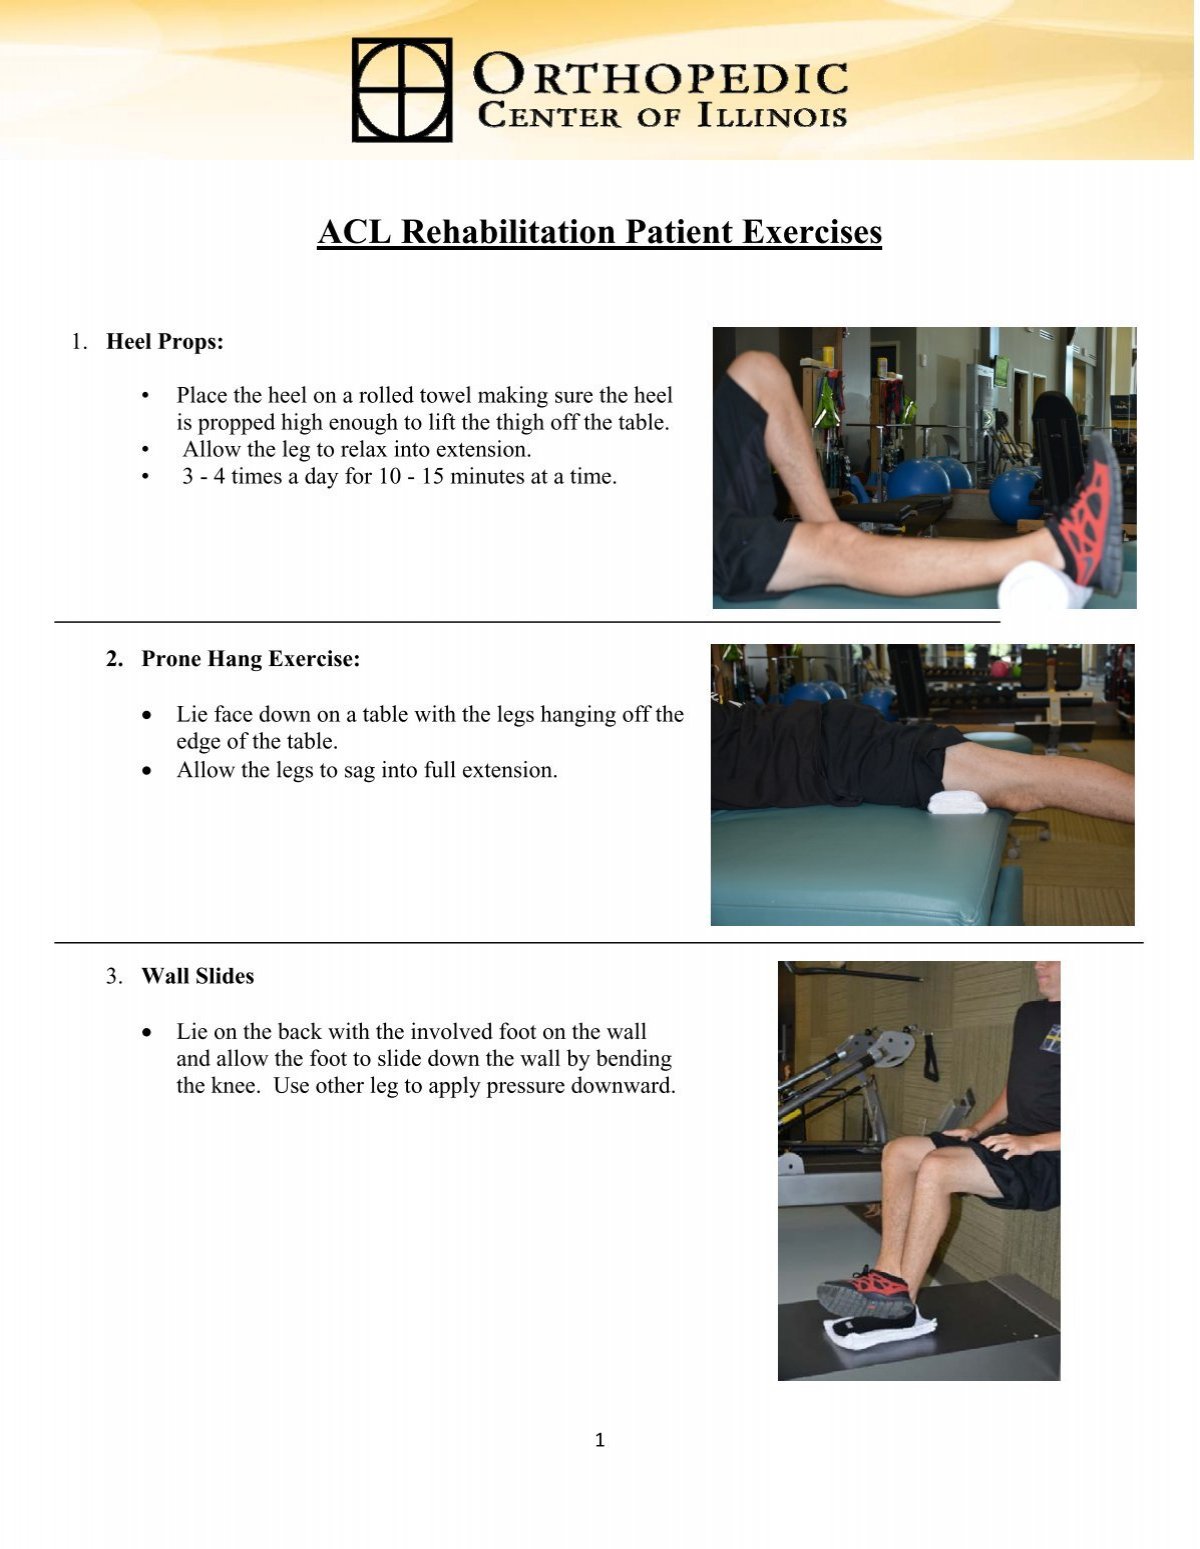 Heel Slides Using a Leg Lifter, Another use for a LEG LIFTER: Recovery  from knee surgery usually includes heel slides during rehabilitation. Using  a leg lifter helps patients increase